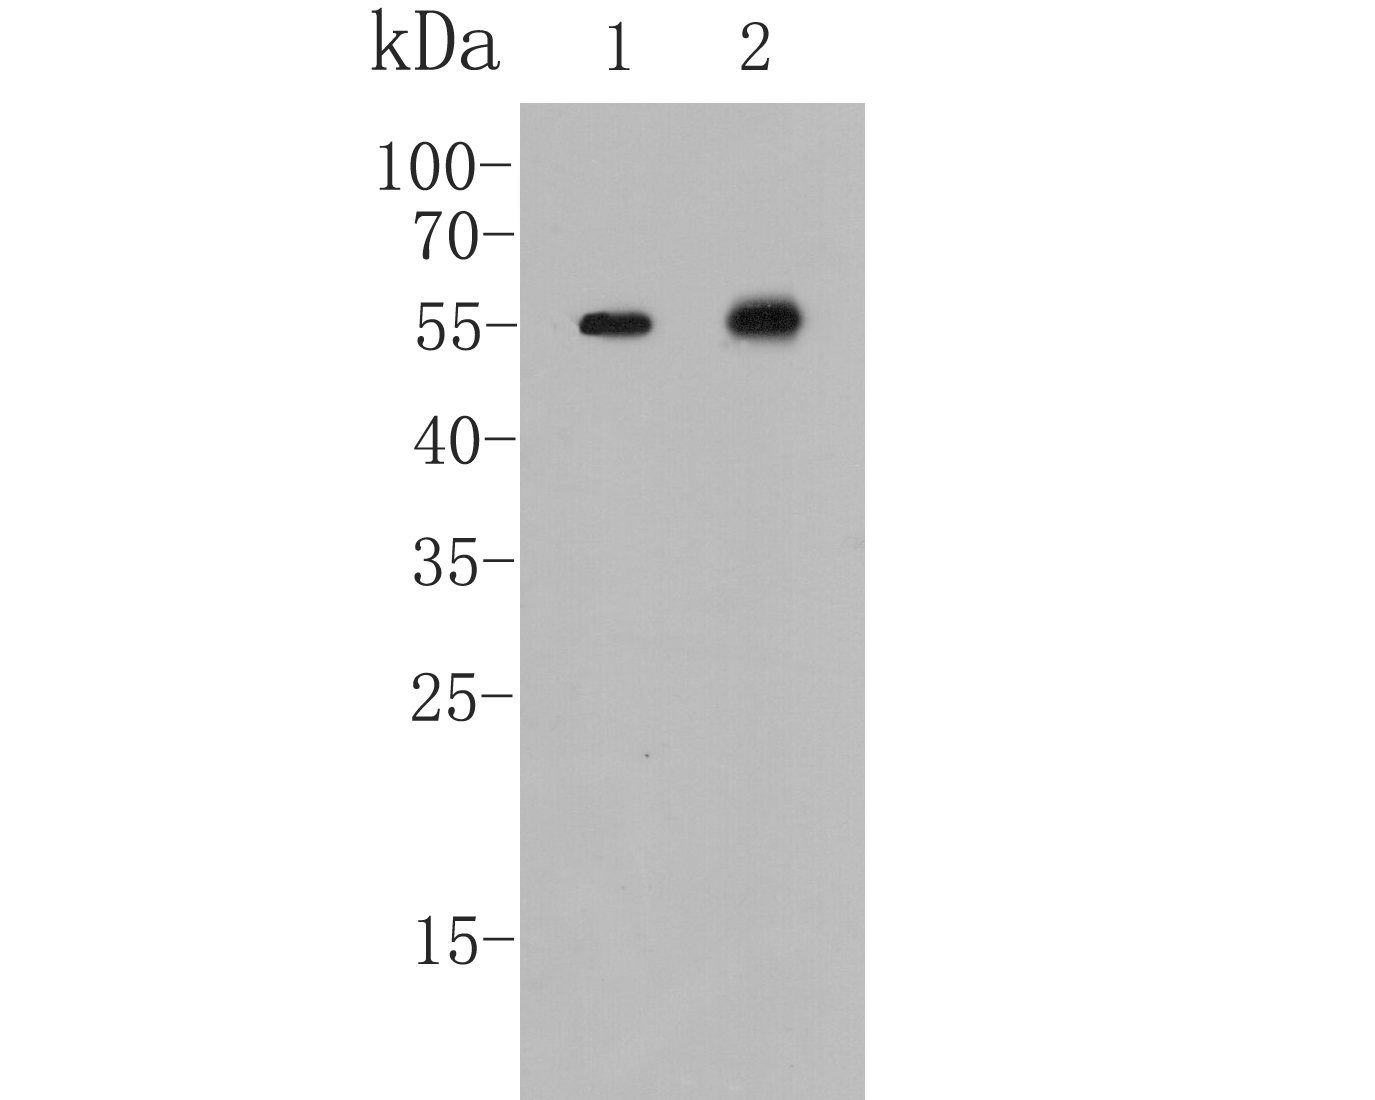 Western blot analysis of ICAD on different lysates. Proteins were transferred to a PVDF membrane and blocked with 5% BSA in PBS for 1 hour at room temperature. The primary antibody (ET7109-91, 1/500) was used in 5% BSA at room temperature for 2 hours. Goat Anti-Rabbit IgG - HRP Secondary Antibody (HA1001) at 1:5,000 dilution was used for 1 hour at room temperature.<br />
Positive control: <br />
Lane 1: Jurkat cell lysate <br />
Lane 2: Human stomach tissue lysate